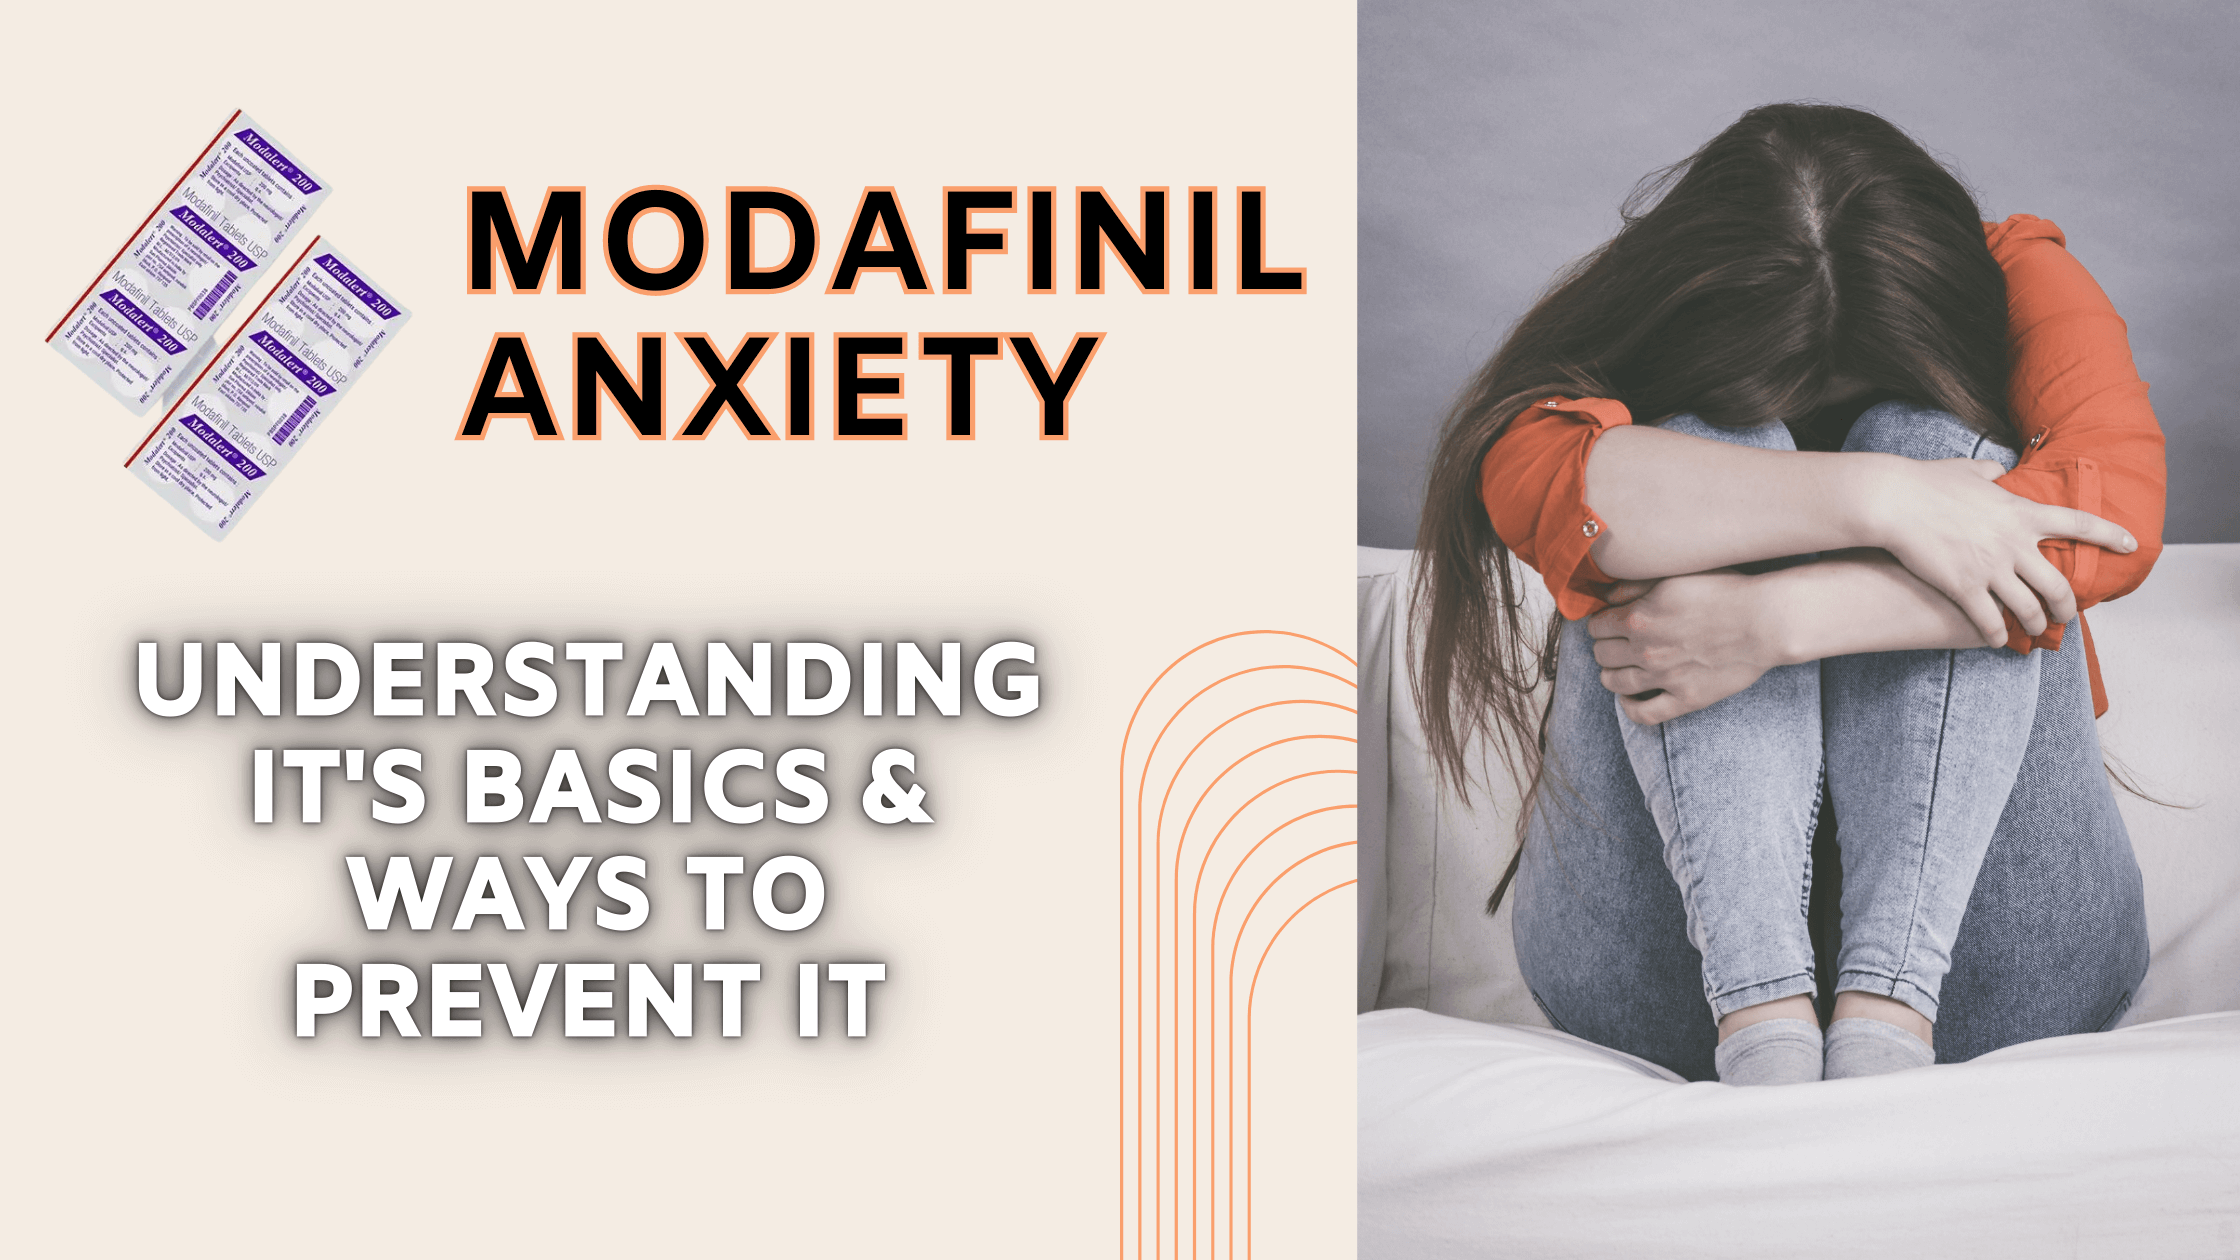 Modafinil Anxiety- Understanding Its Basics & Ways To Prevent It